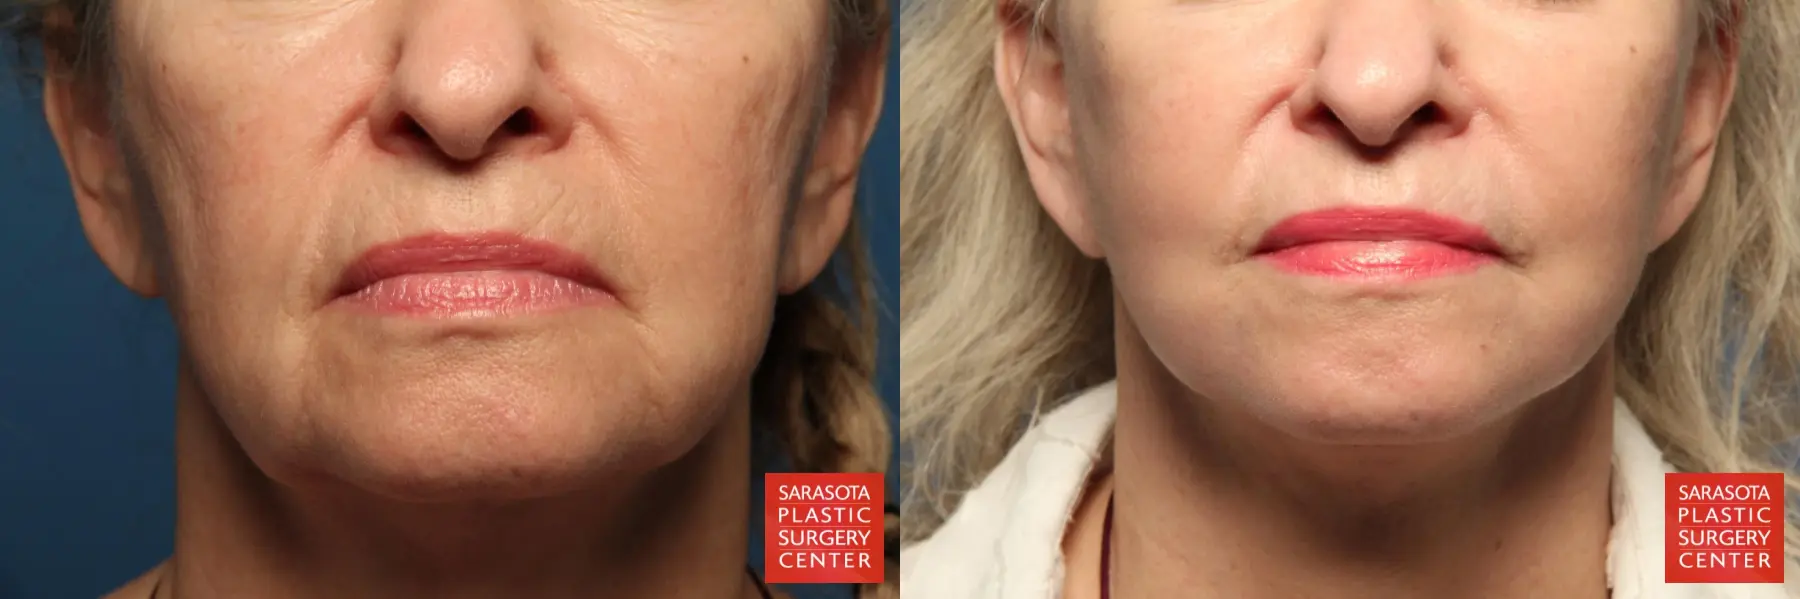 Laser Skin Resurfacing - Face: Patient 1 - Before and After 1